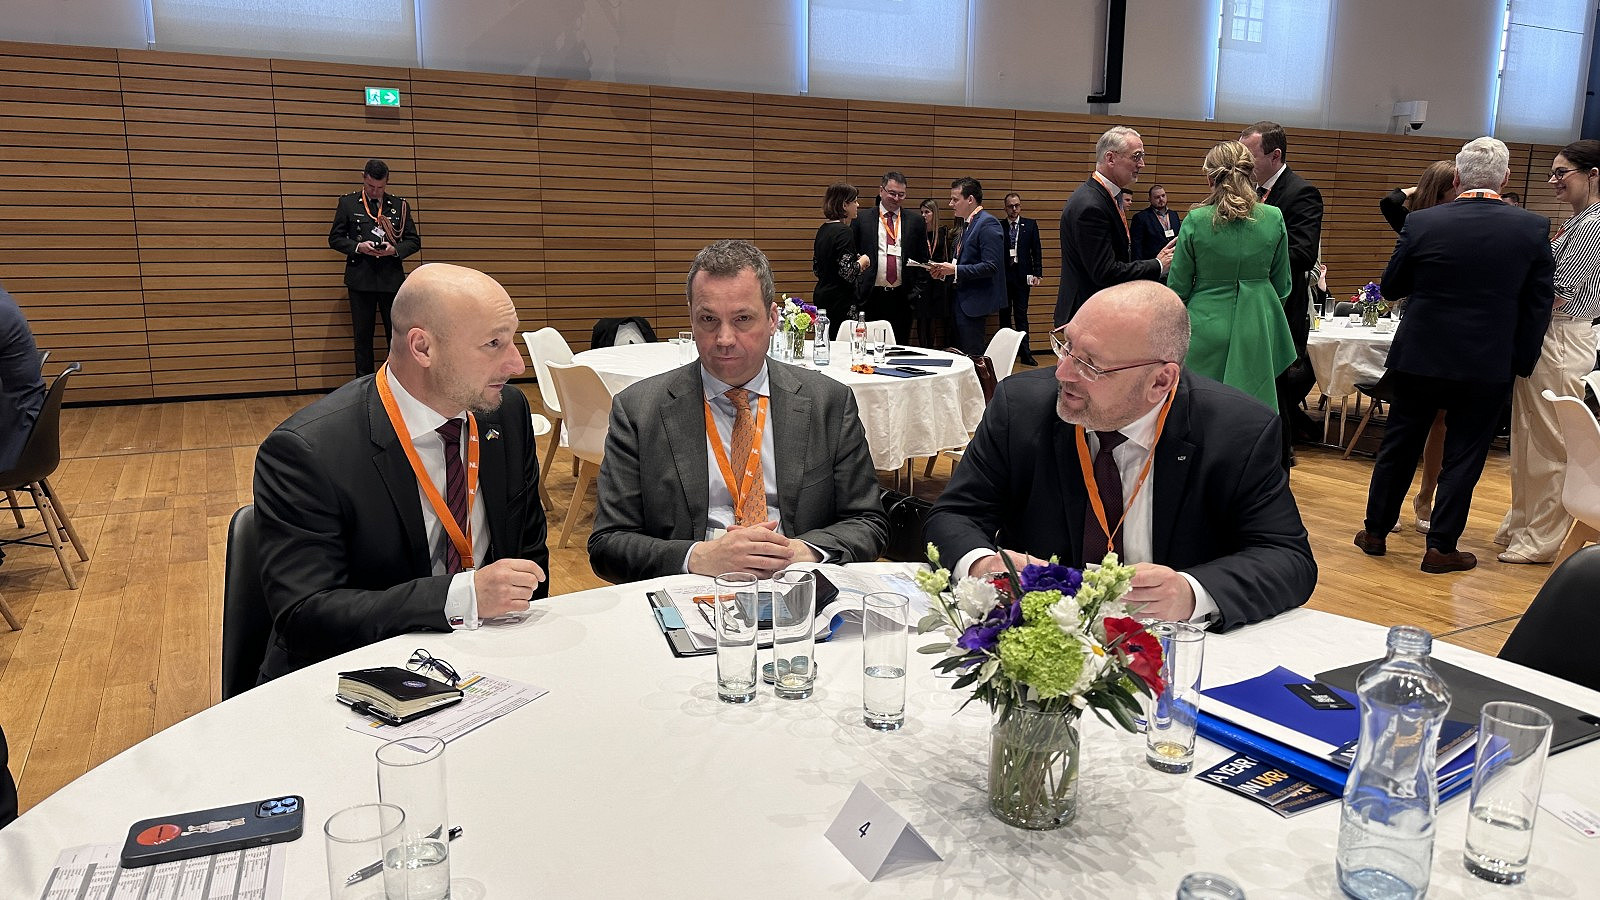 The President of the Slovak Republic and His Majesty the King of the Netherlands opened a business forum in which we took part. Andrej Žiarovský, Director for Development and International Operations, debated for VUJE